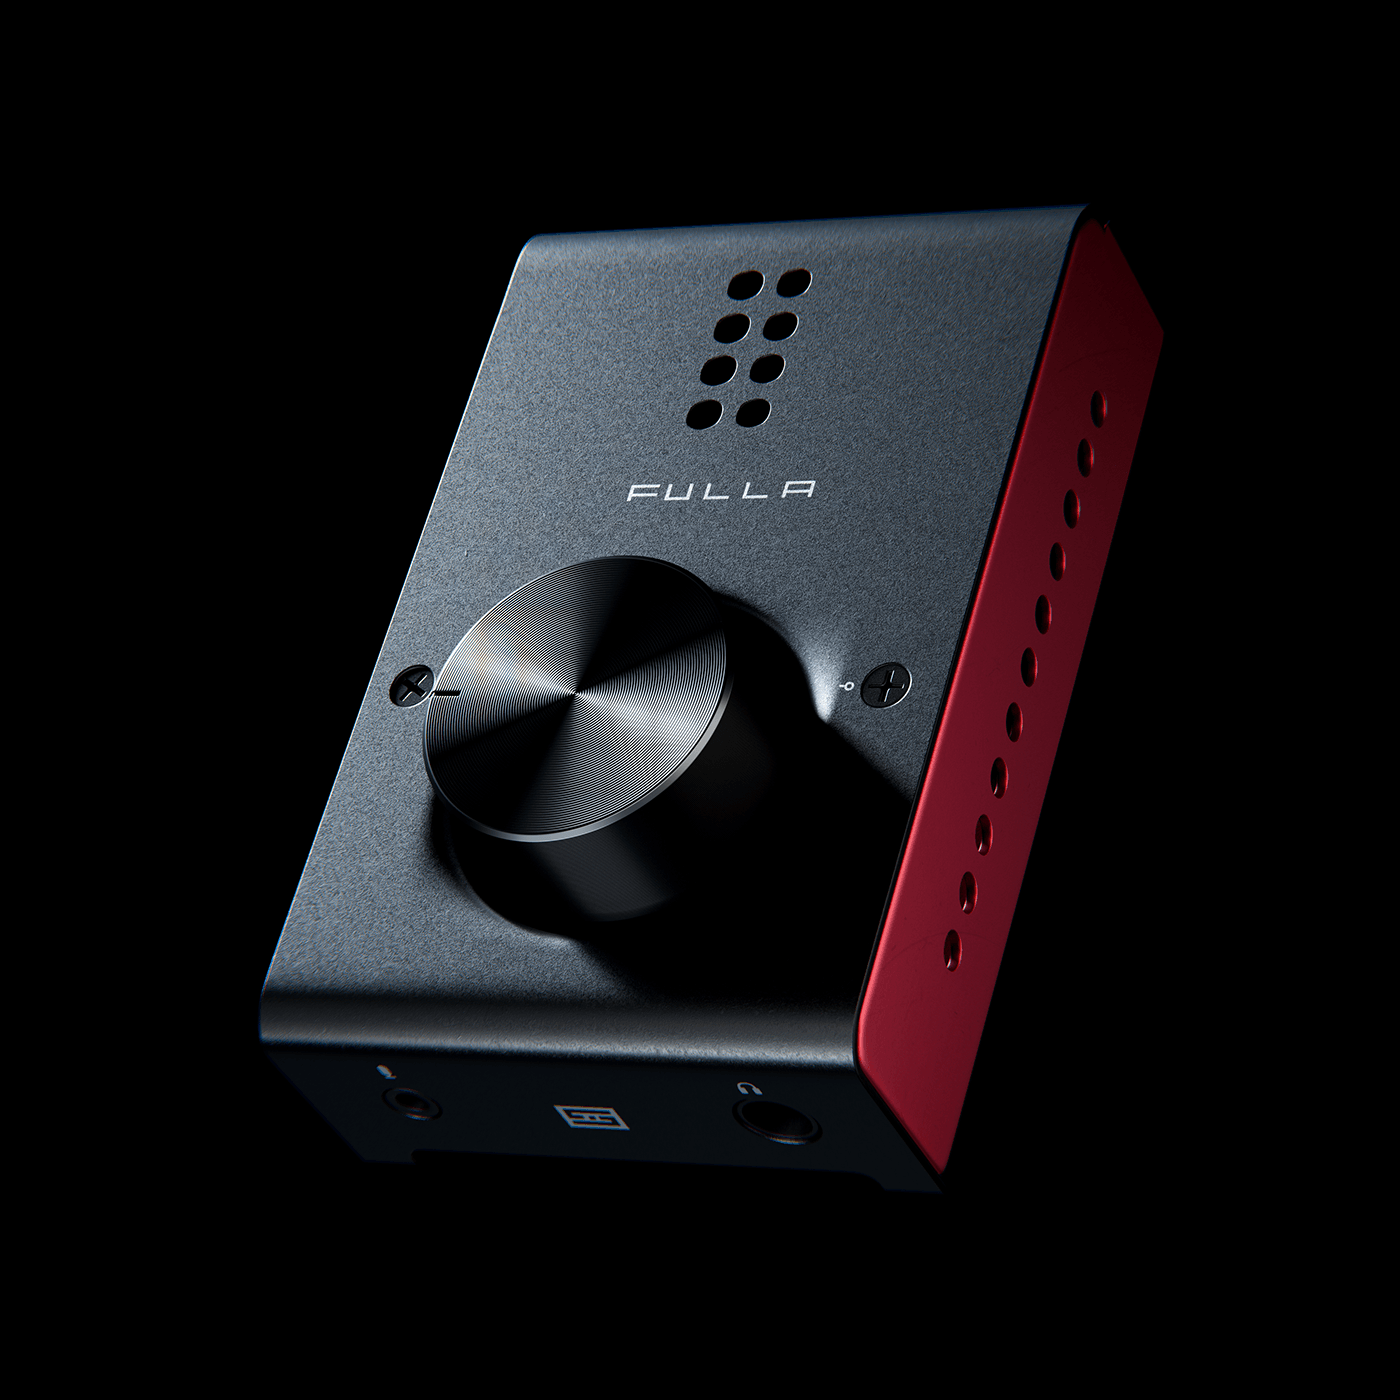 Schiit Fulla E red DAC combo in this stunning CGI render, elegantly suspended on a black background